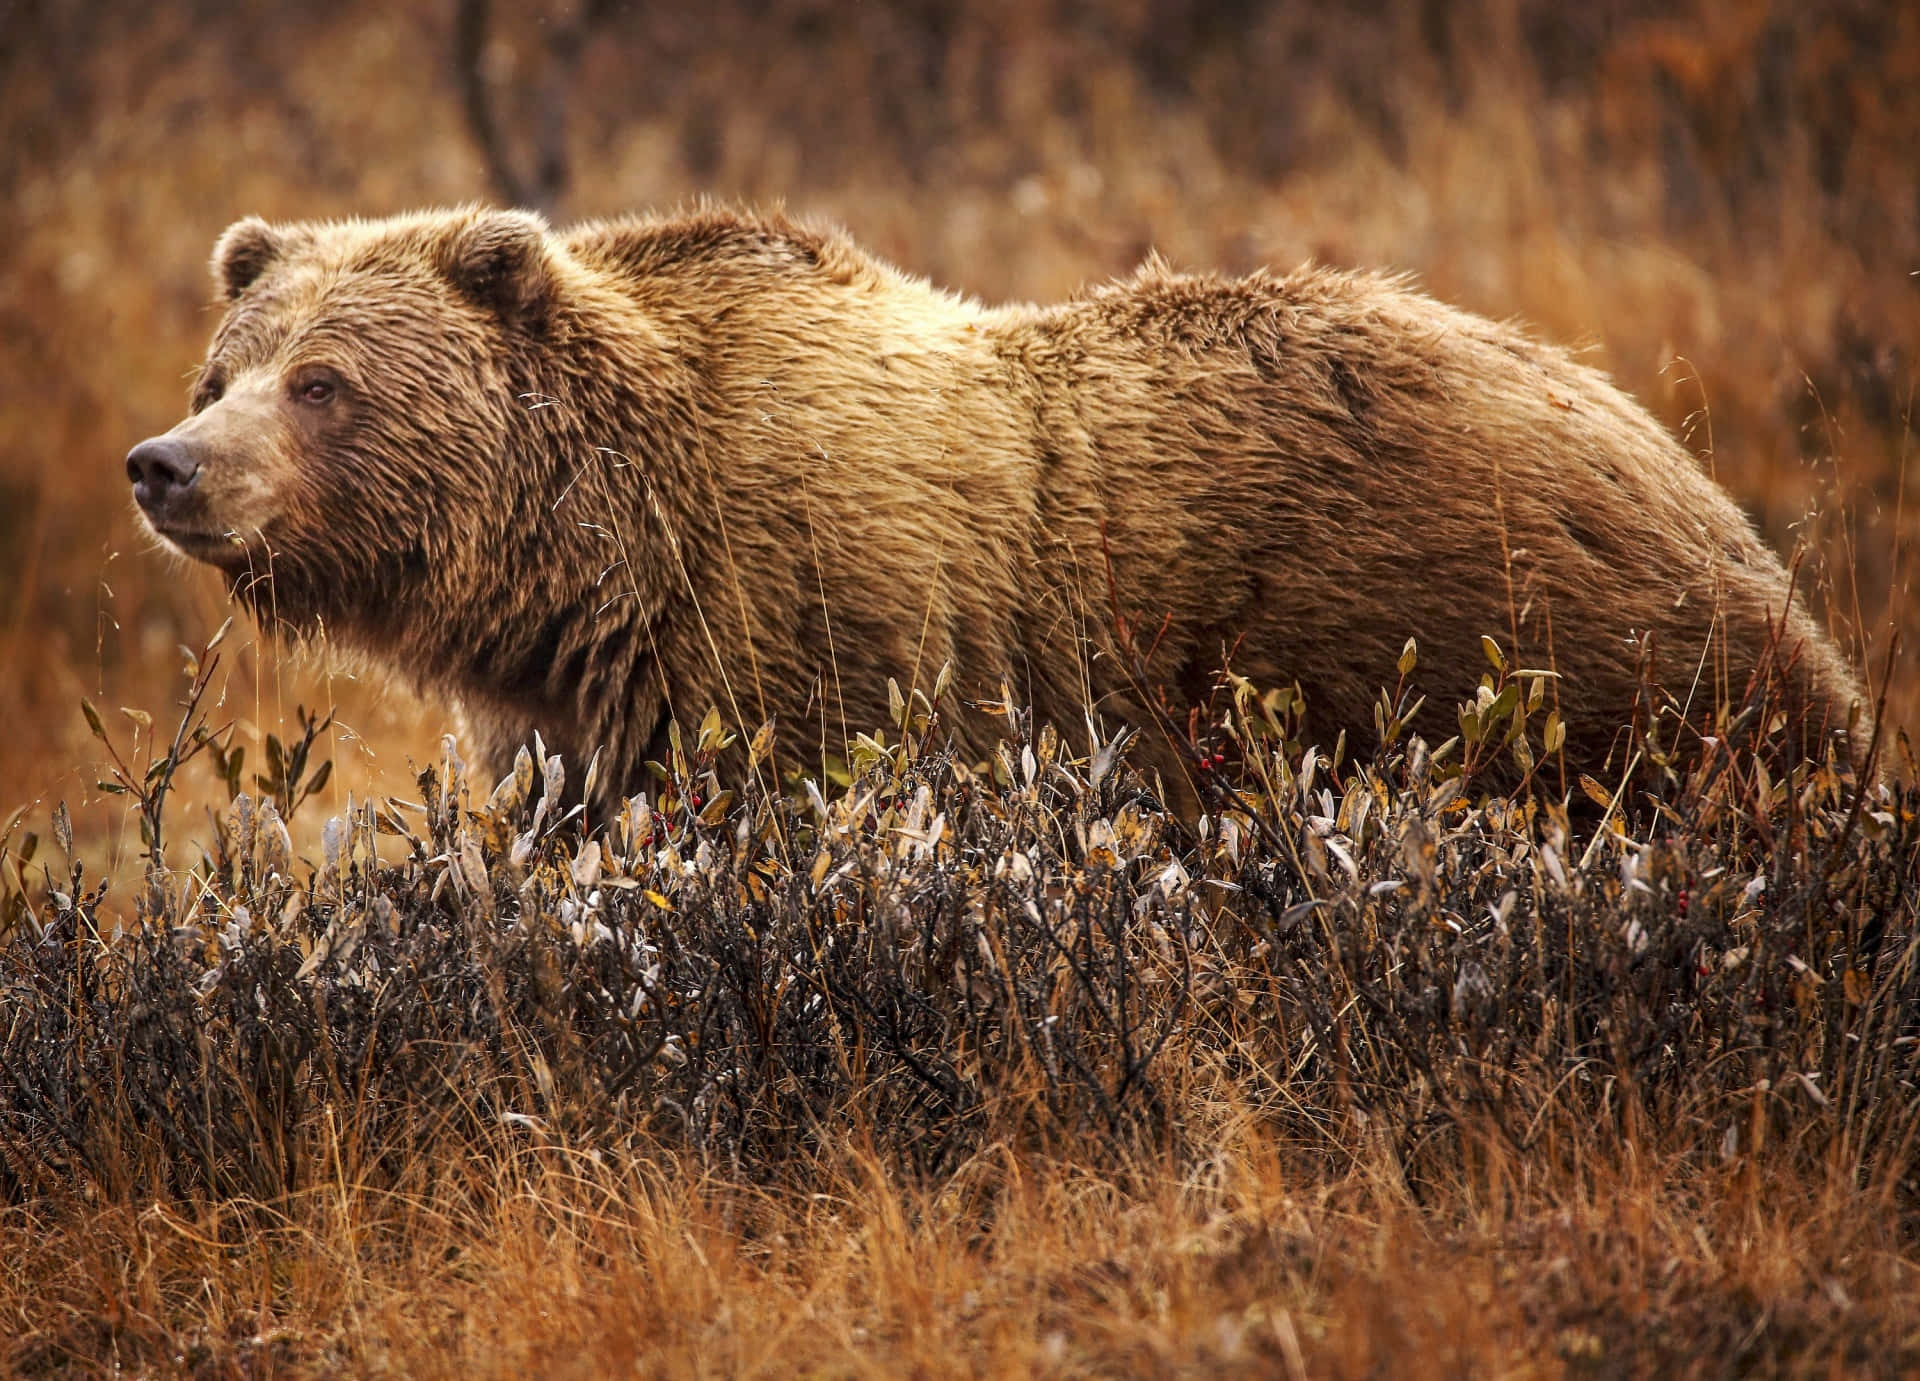 A grizzly bear standing in the grass, basking in the sun.